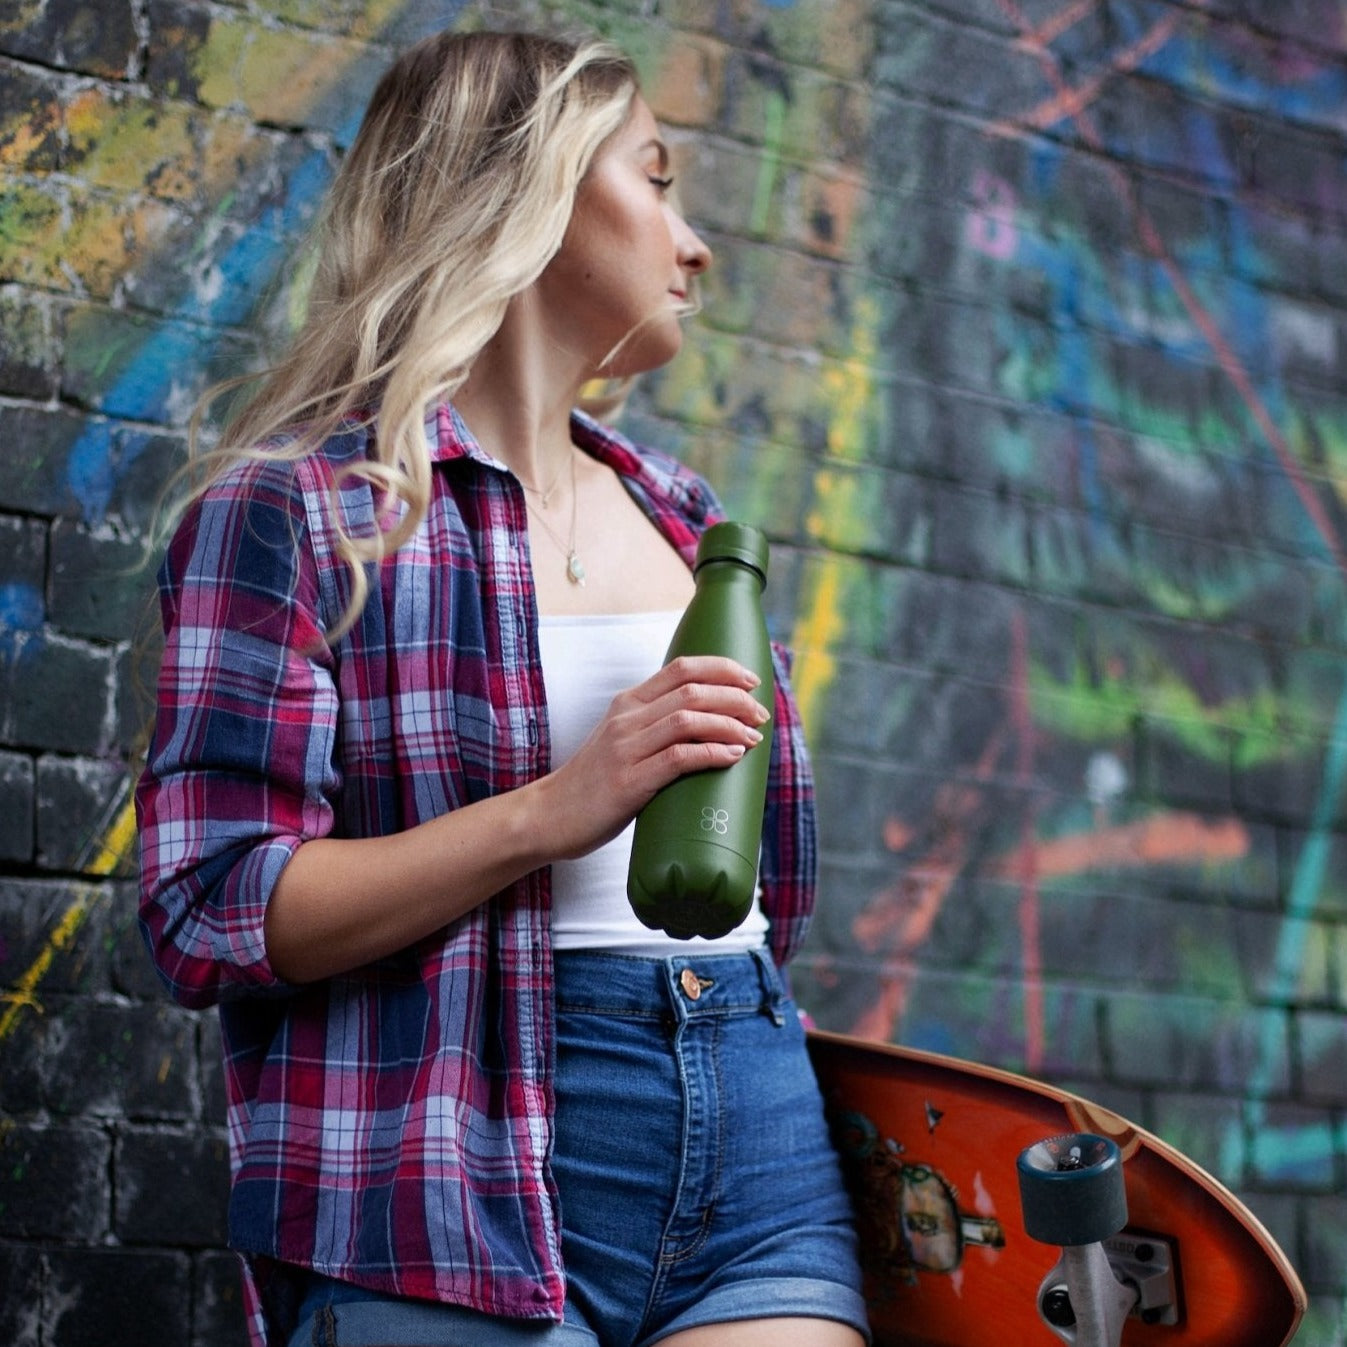 Lady with skateboard and stands at a wall with a green water bottle in hand. looks into the distance.